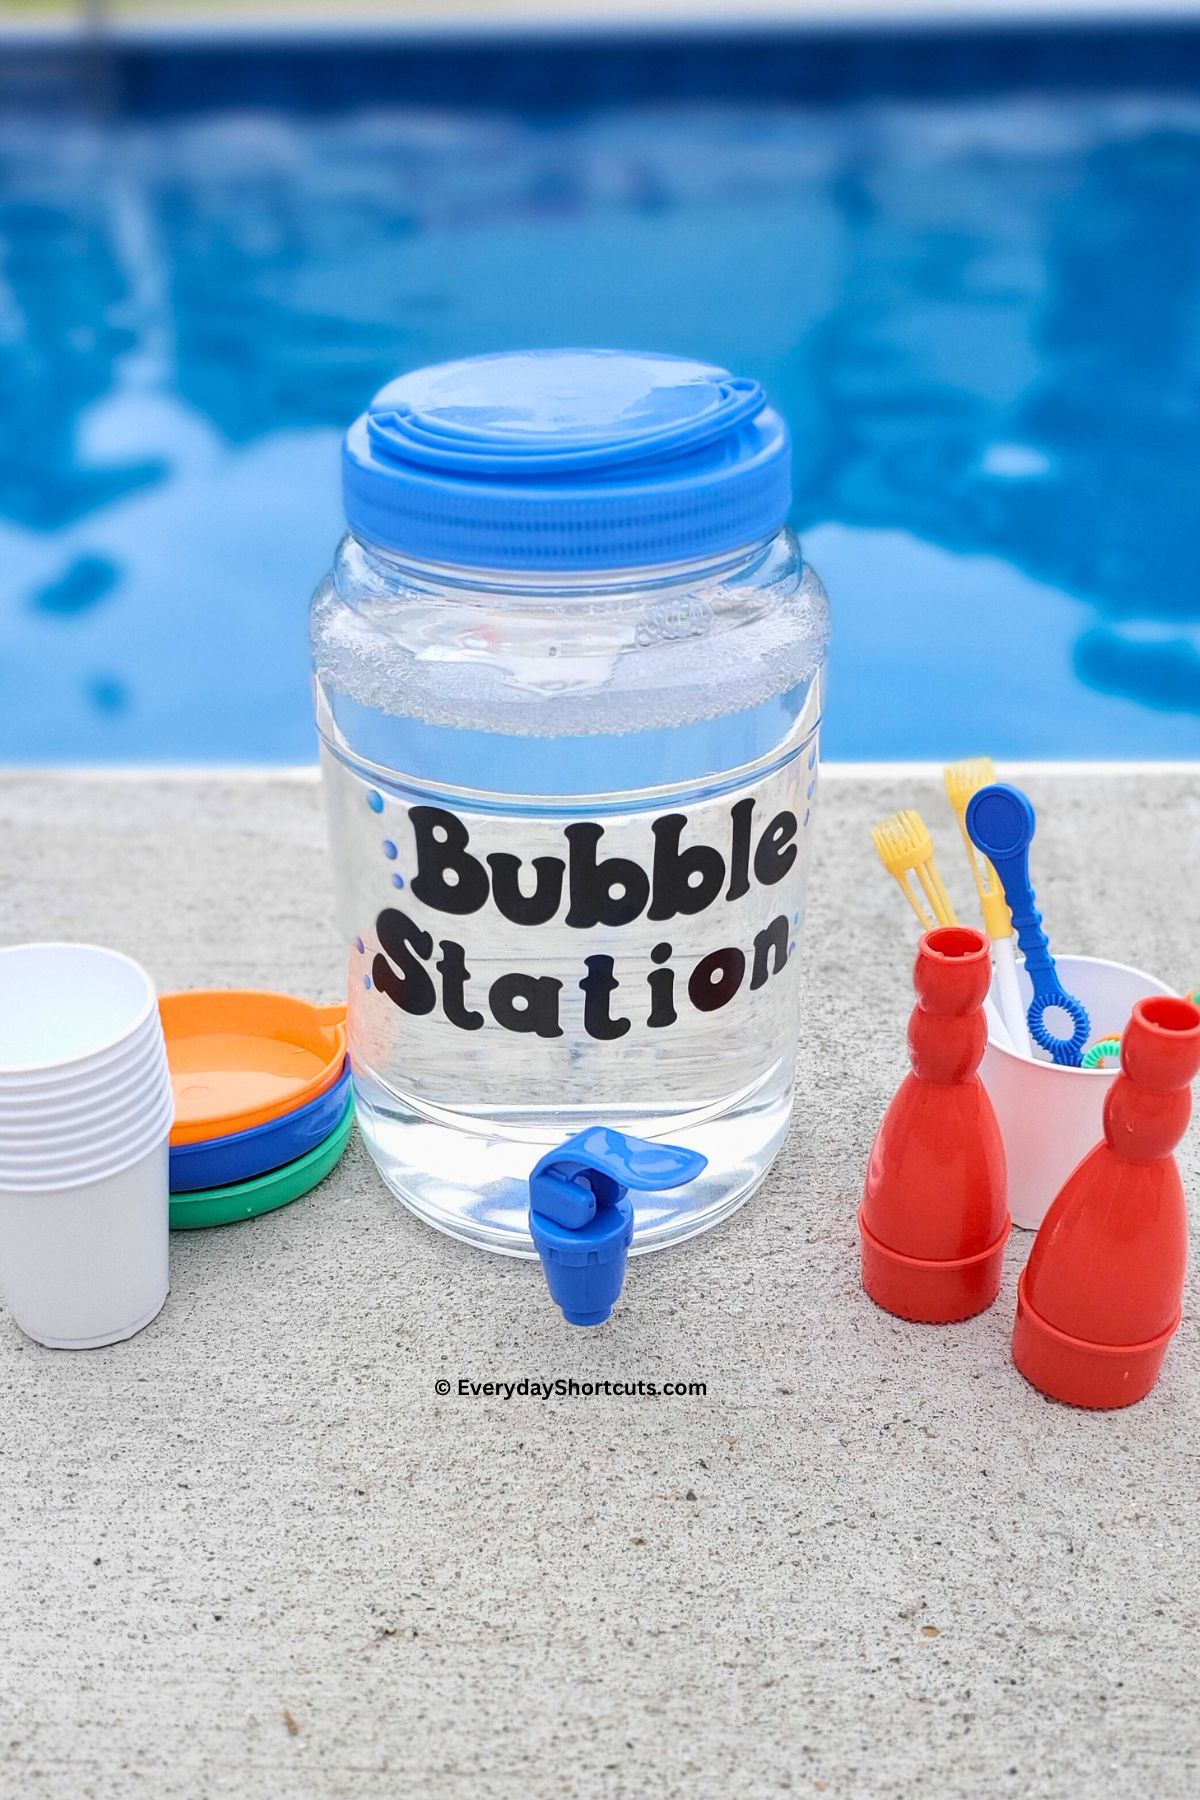 how to make a bubble station with a plastic jar and spigot